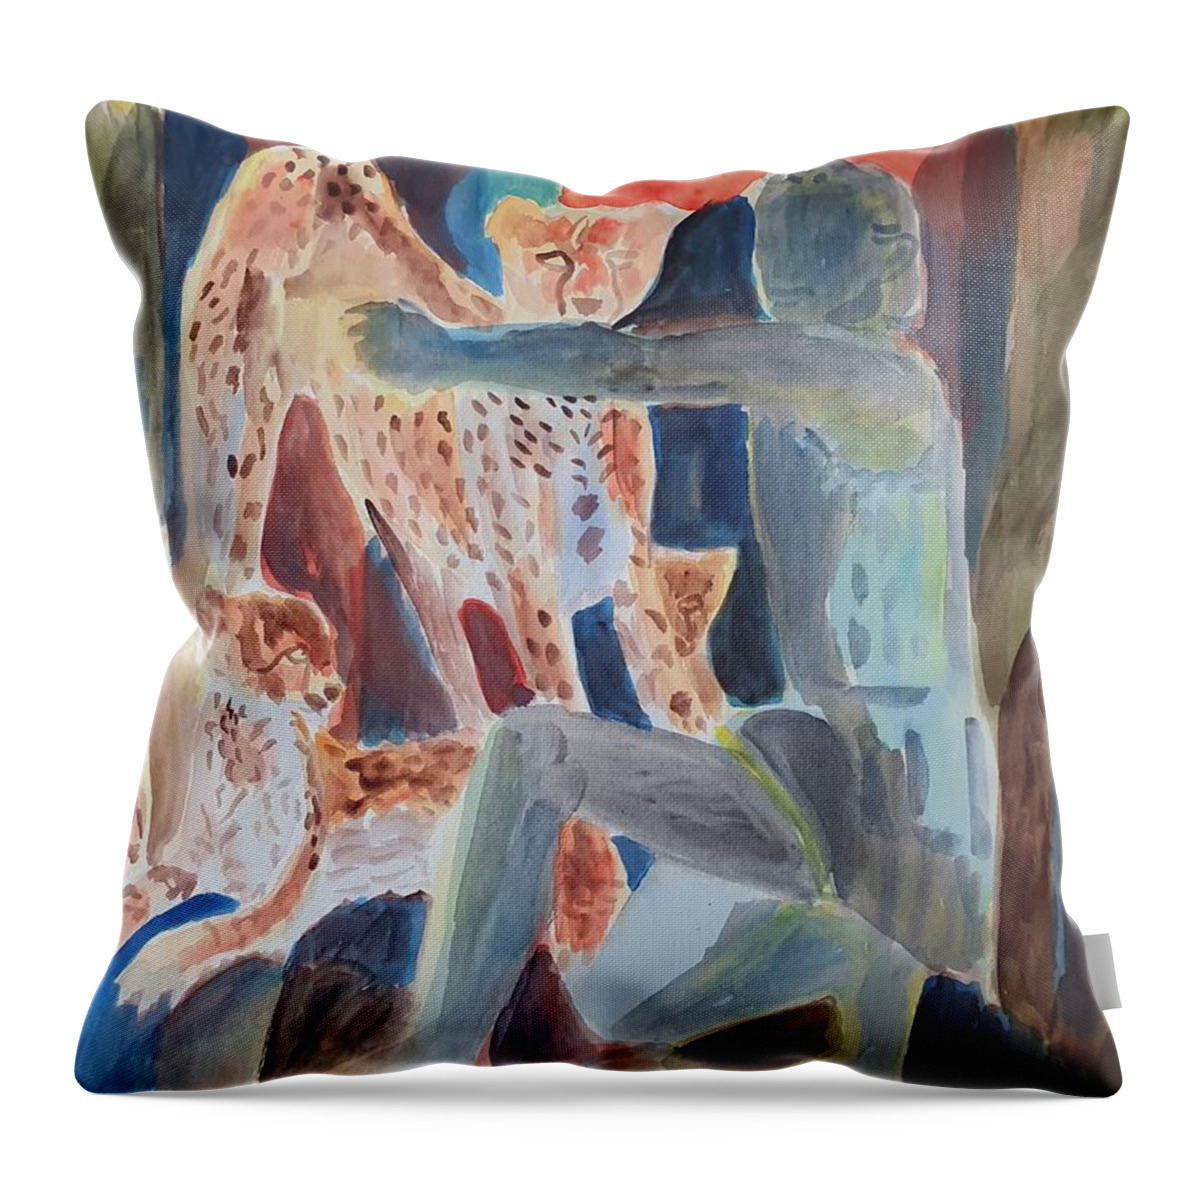 Masterpiece Paintings Throw Pillow featuring the painting The Hunter by Enrico Garff